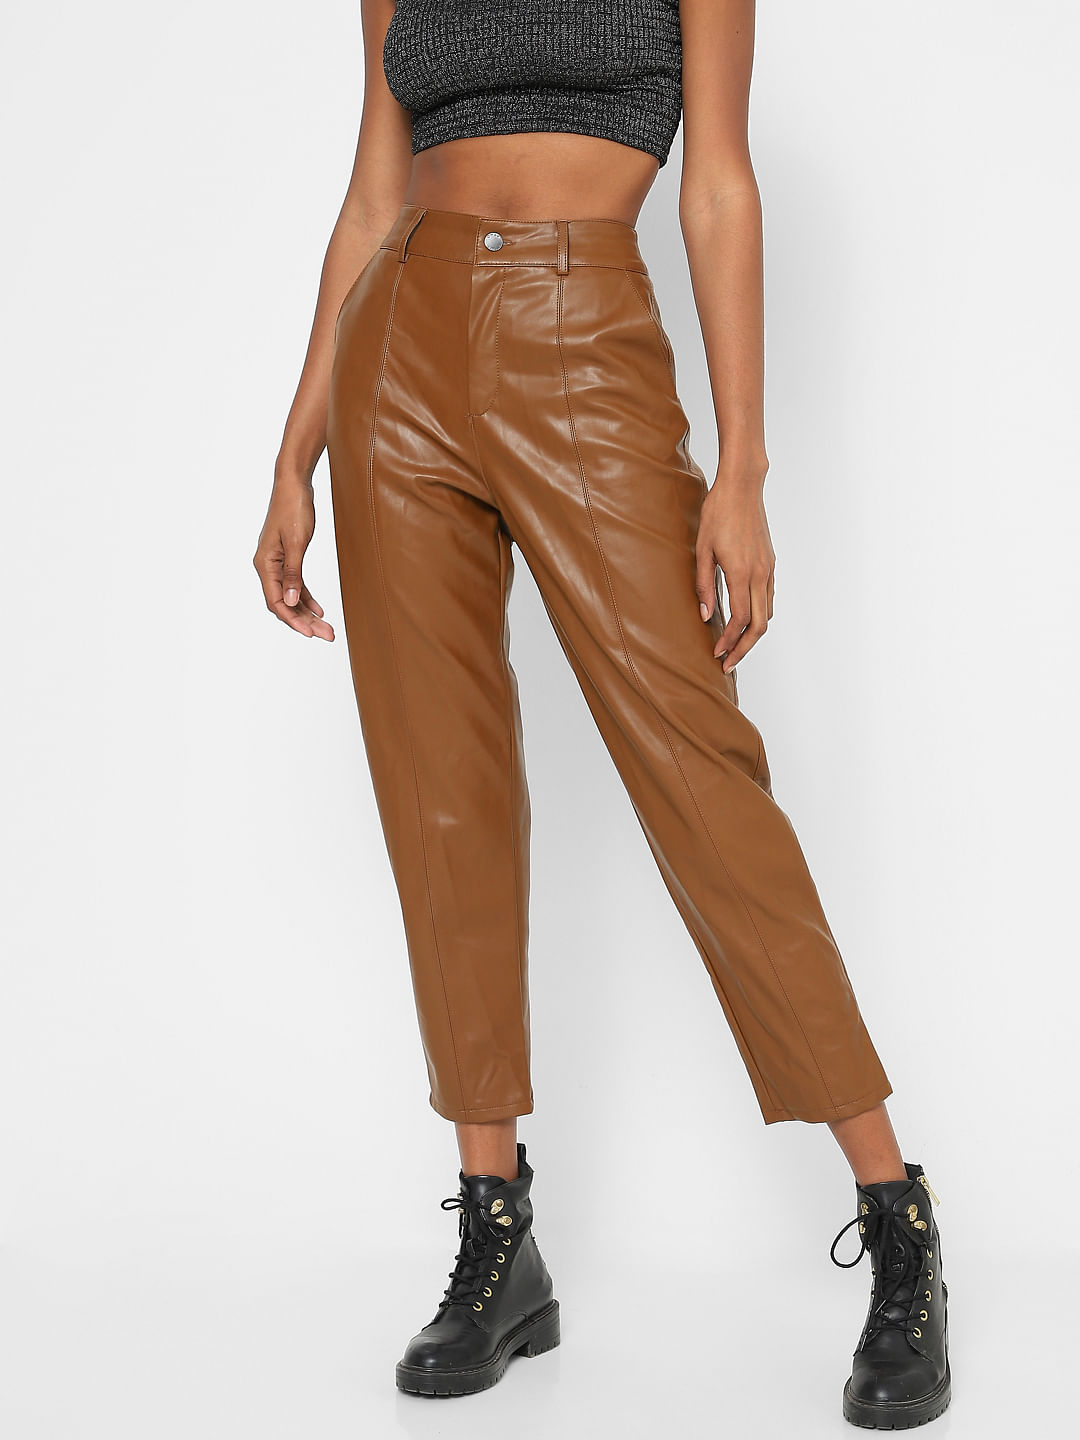 16 Best Leather Pants of 2022 Agolde Wolford and More